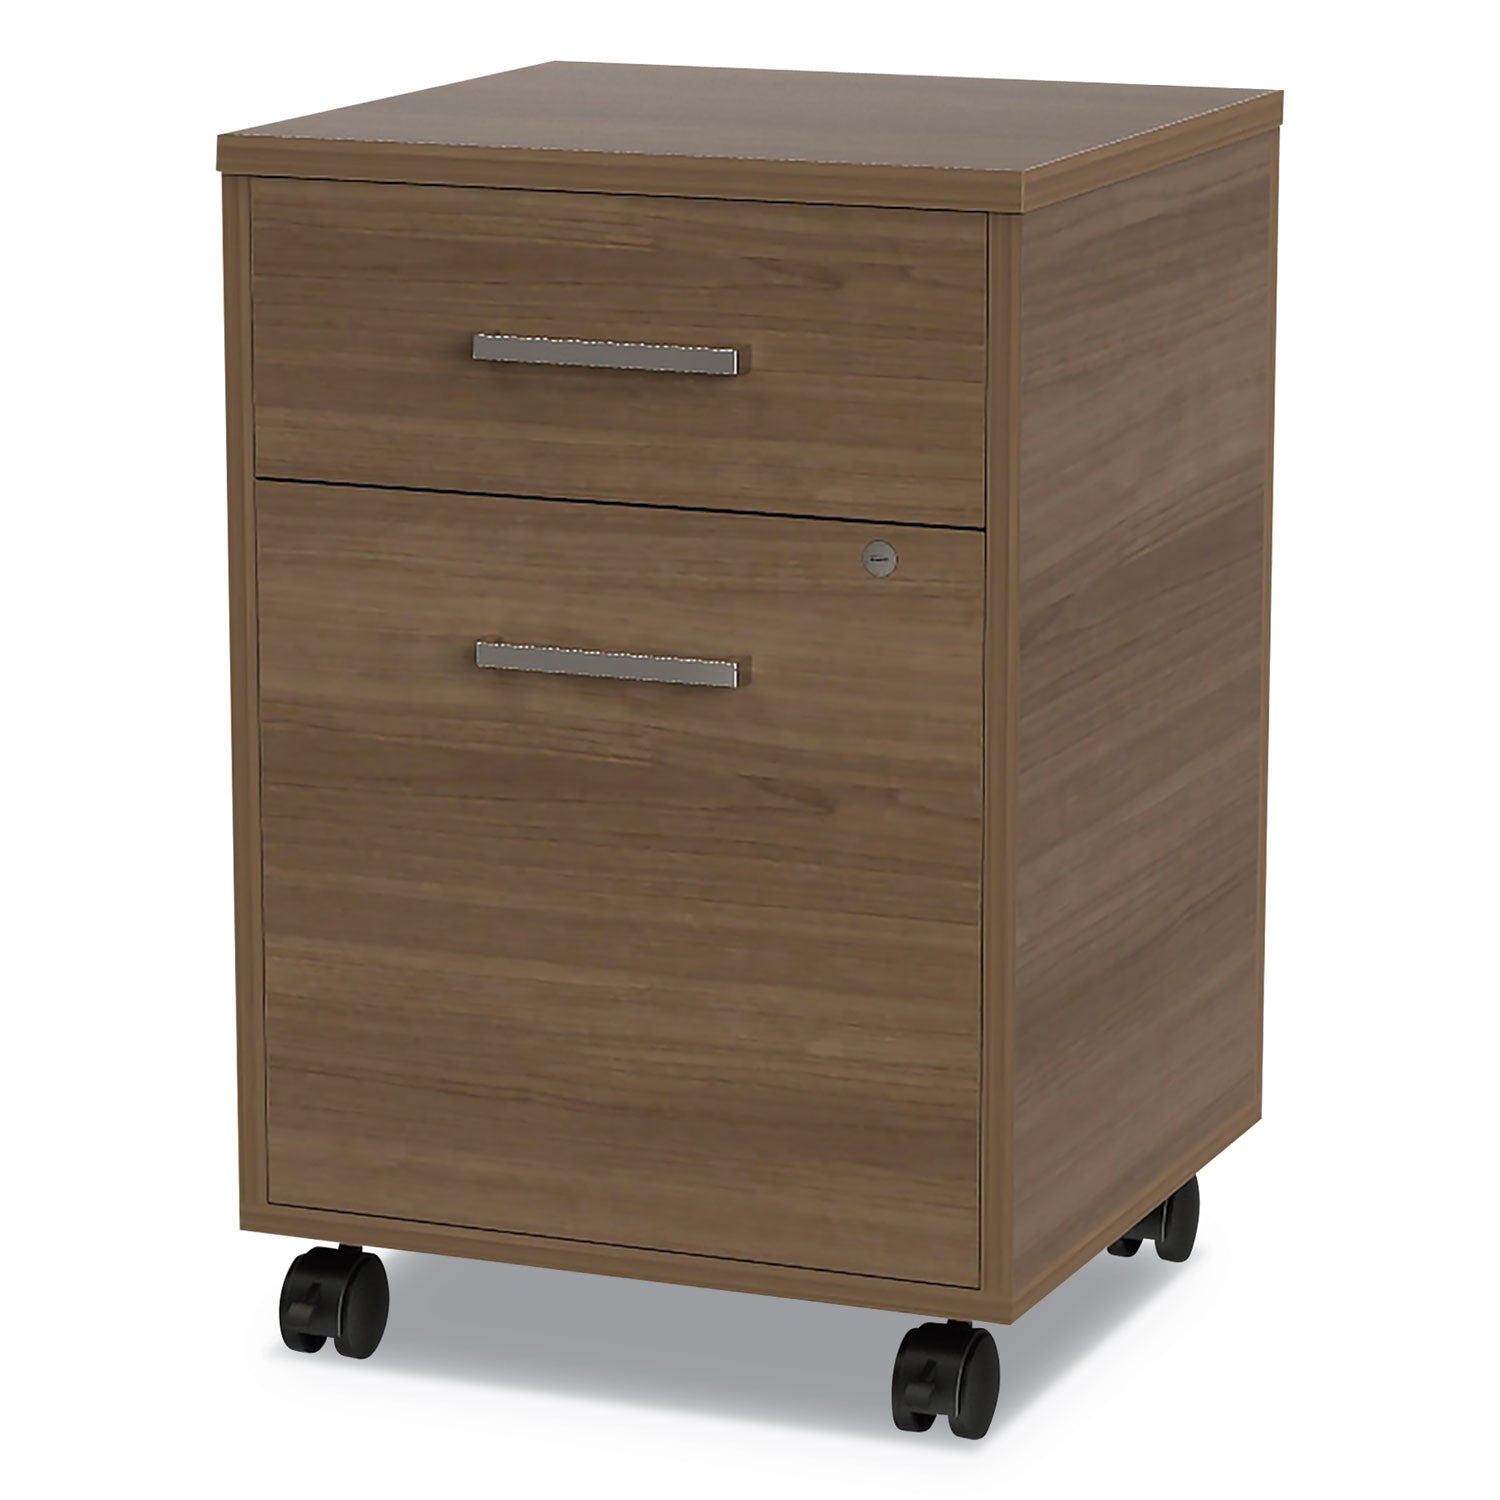 urban-mobile-file-pedestal-left-or-right-2-drawers-box-file-legal-a4-natural-walnut-16-x-1525-x-2375_litur610nw - 1